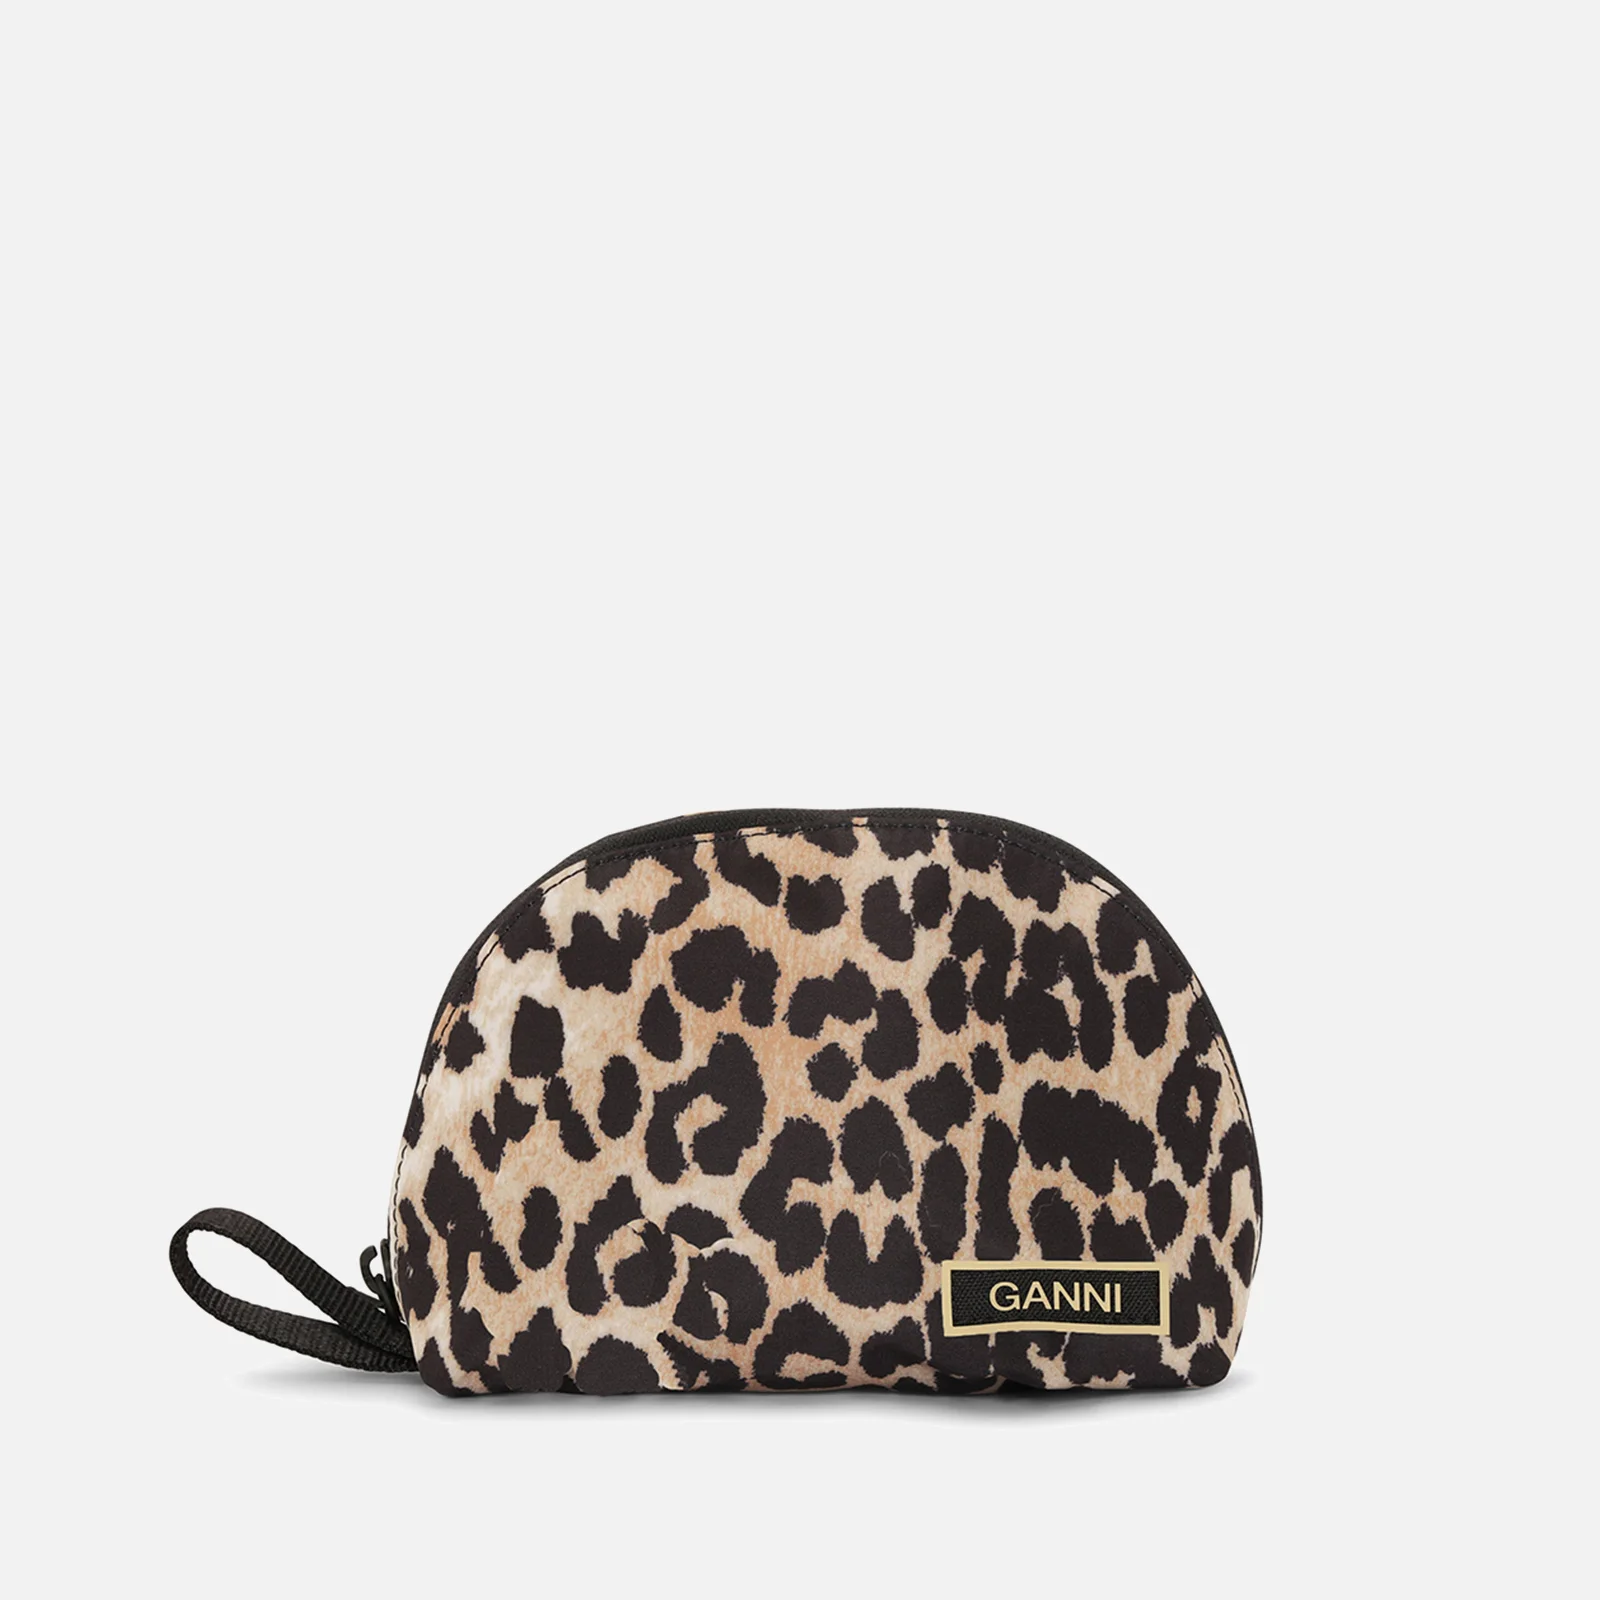 Ganni Leopard Print Recycled Shell Vanity Bag Image 1